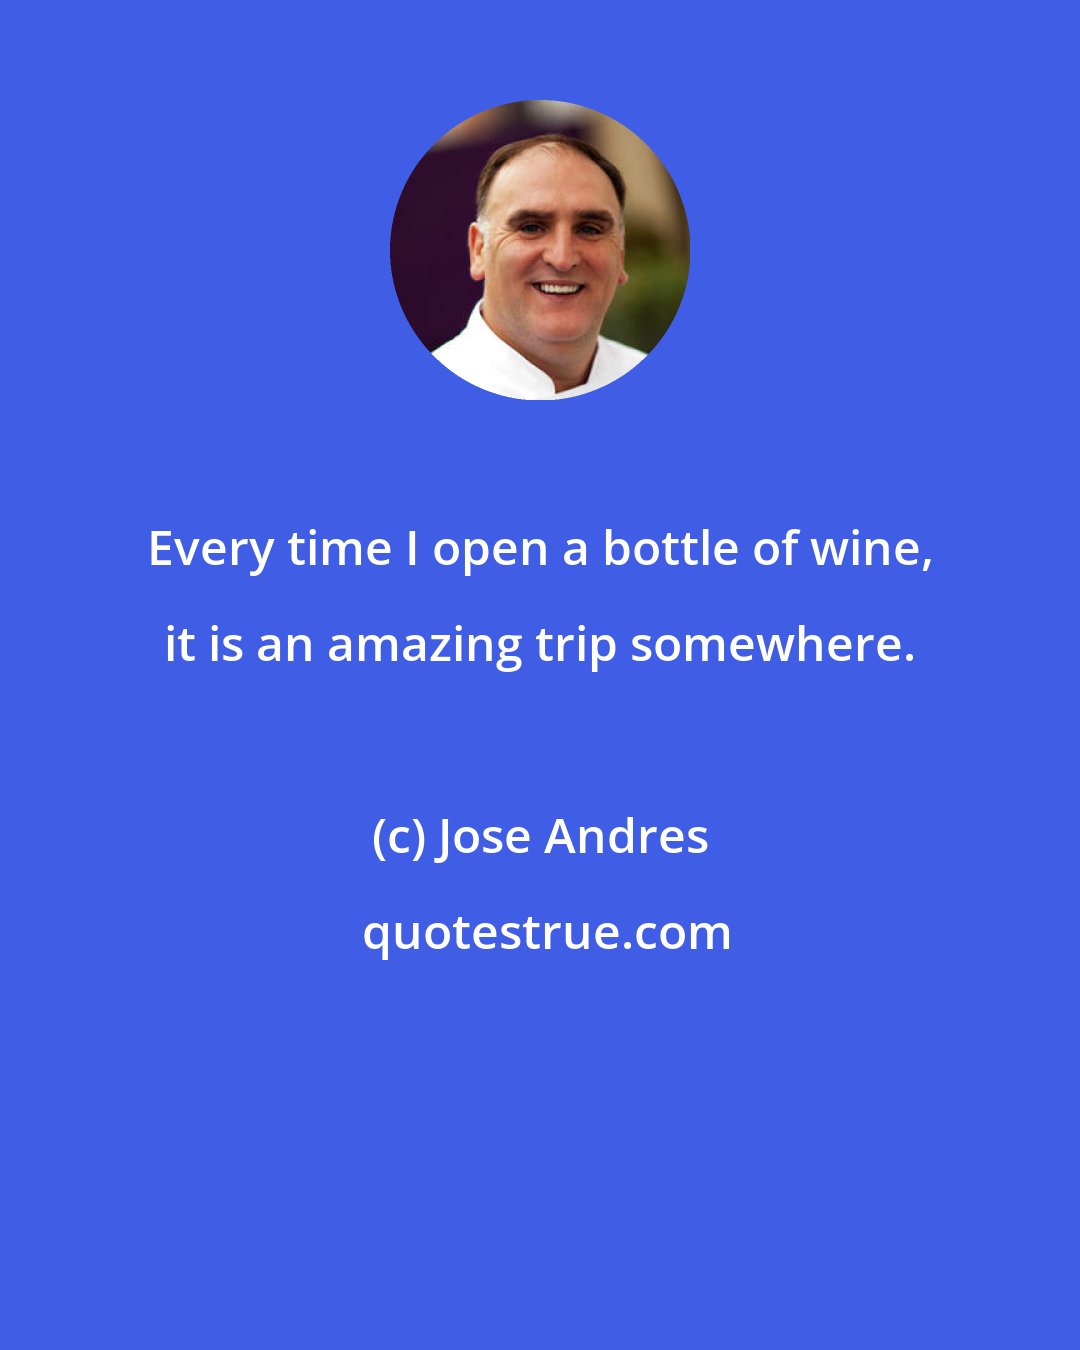 Jose Andres: Every time I open a bottle of wine, it is an amazing trip somewhere.